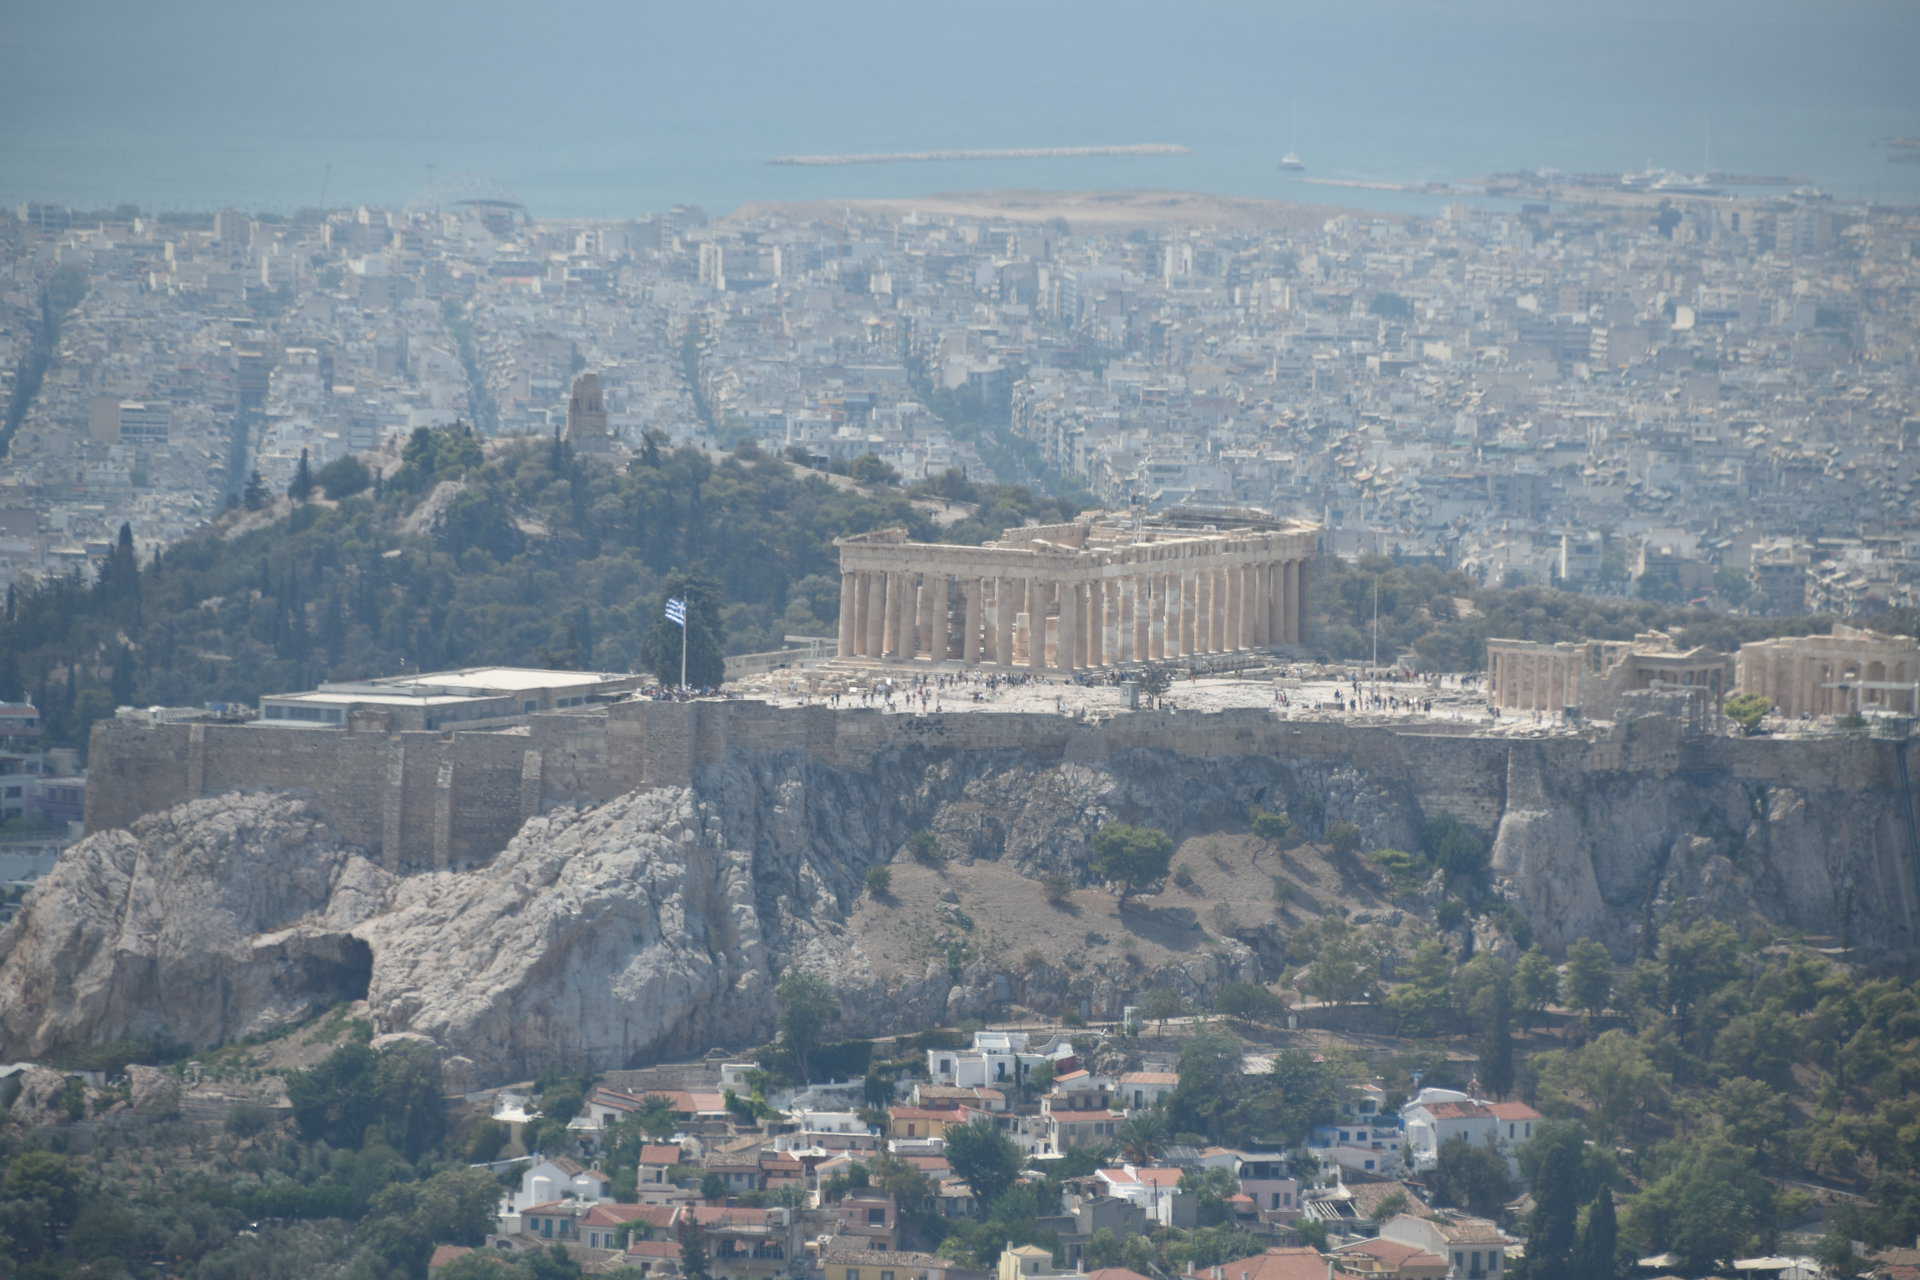 Acropolis seen from Lycabettus Hill in Athens, Greece